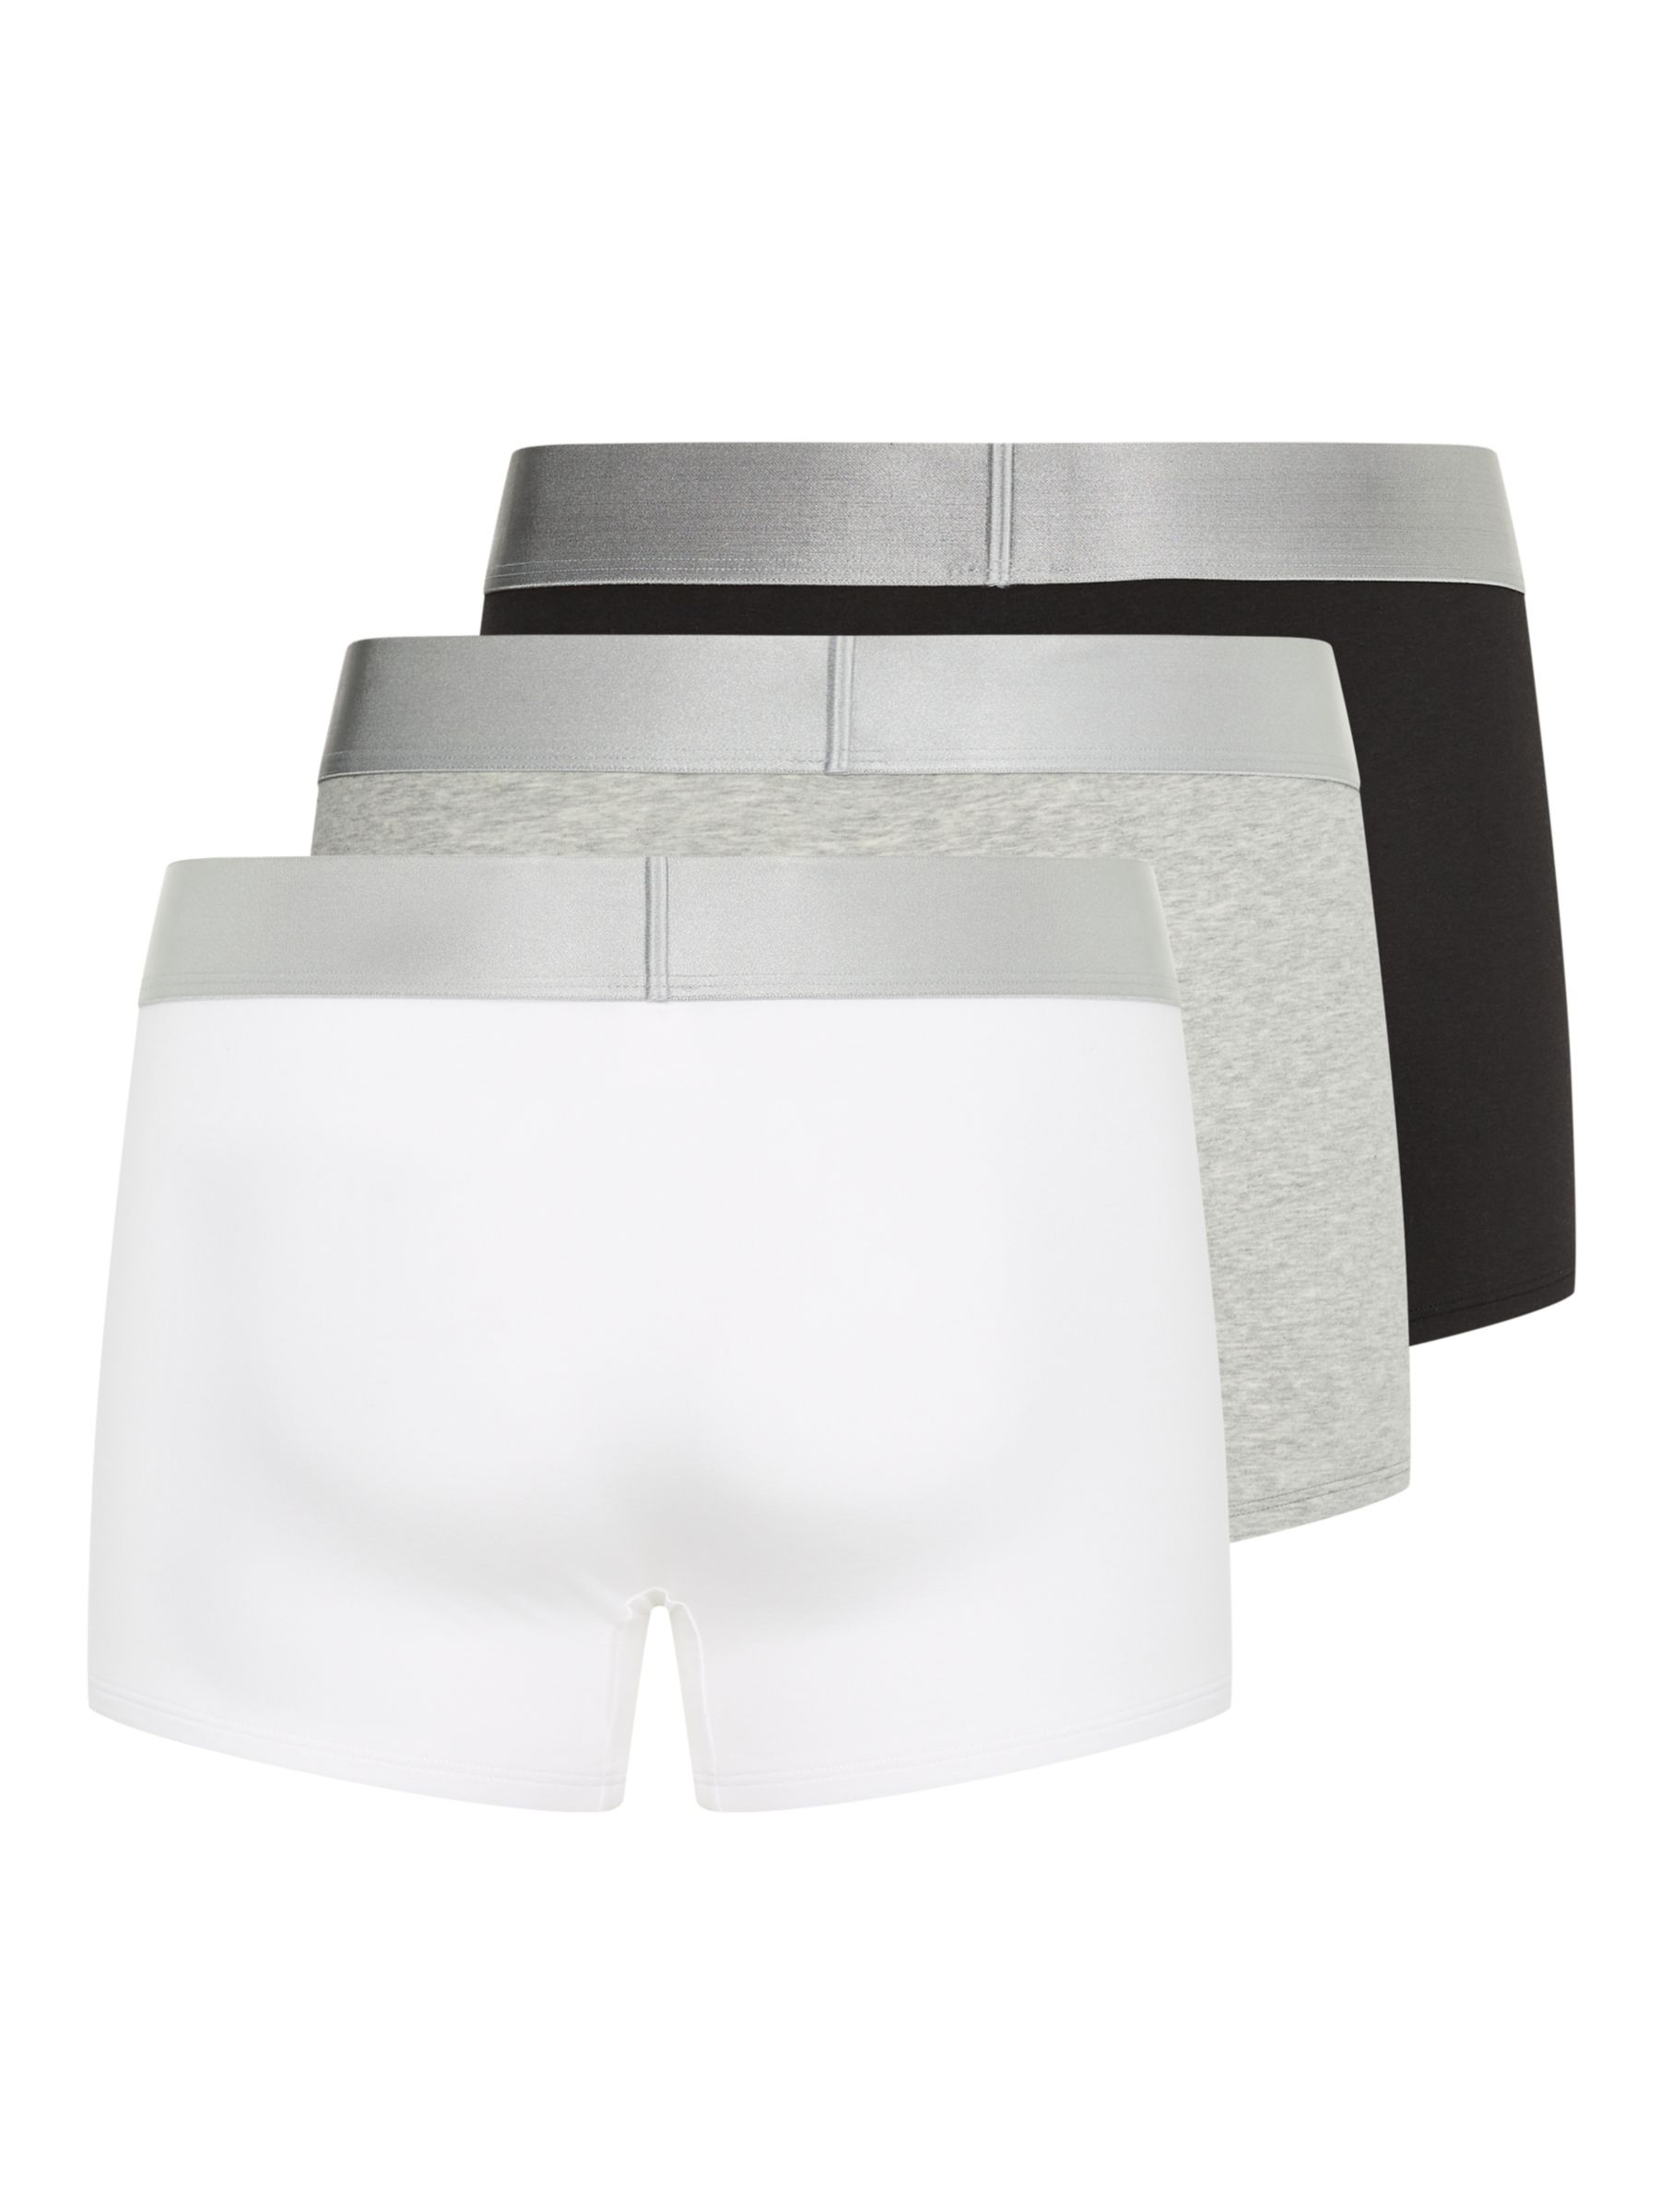 Calvin Klein Recycled Cotton Blend Trunks, Pack of 3, Black/White/Grey, XS